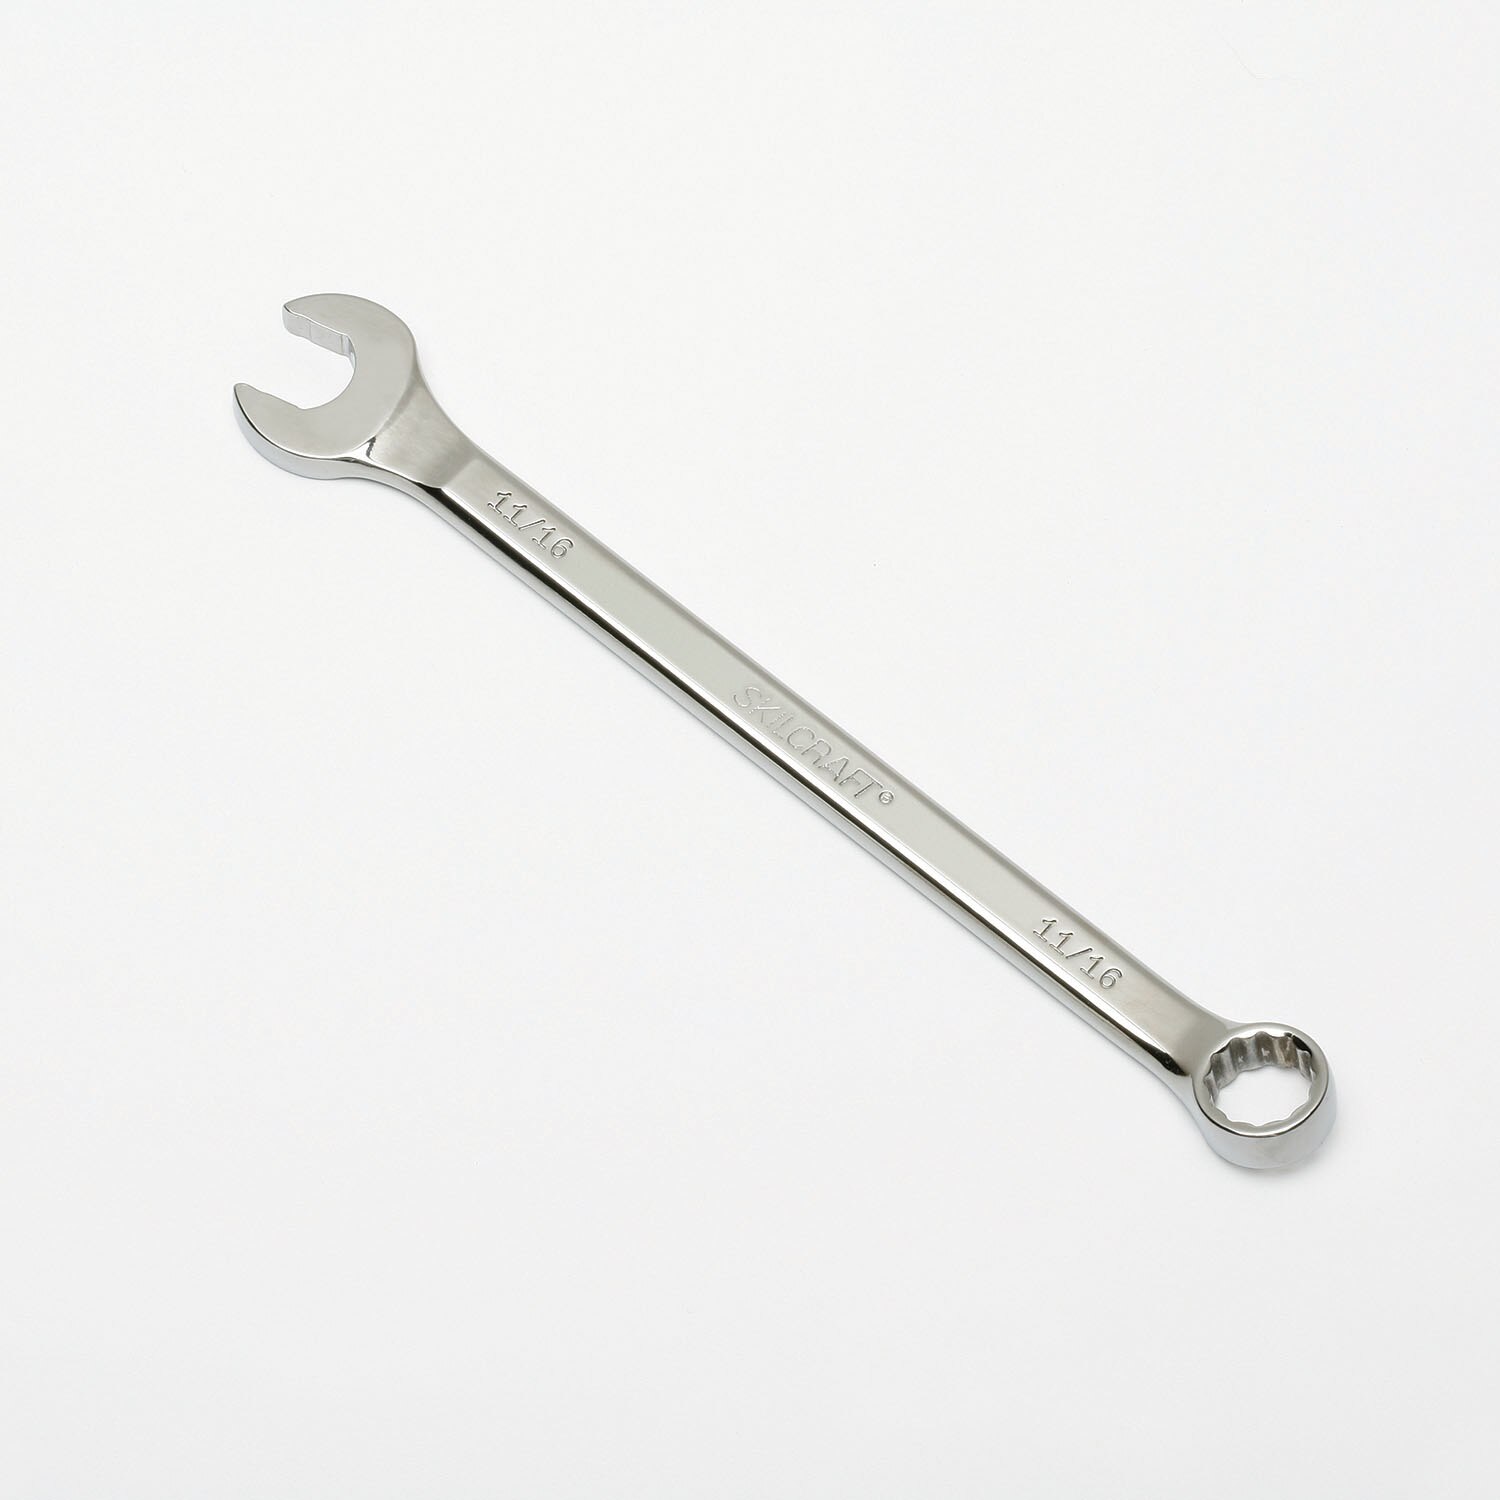 Wrench, Combination, Chrome, 12 Pt, 11/16"